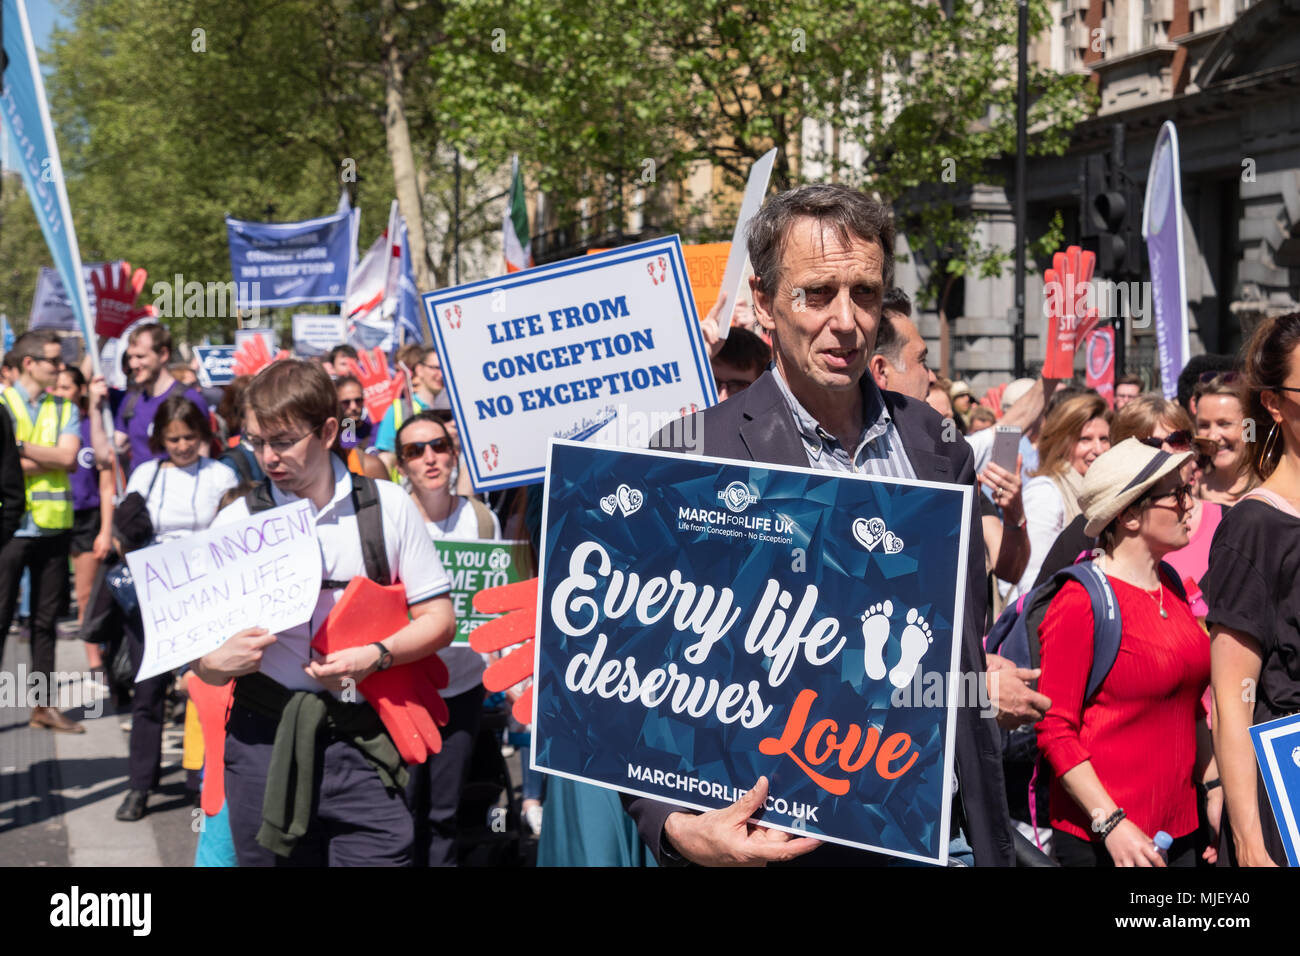 London, UK, 5th May 2018, Members of the March for Life UK held a march through central London. A male holds a every life deserves love placard Credit: adrian looby/Alamy Live News Stock Photo